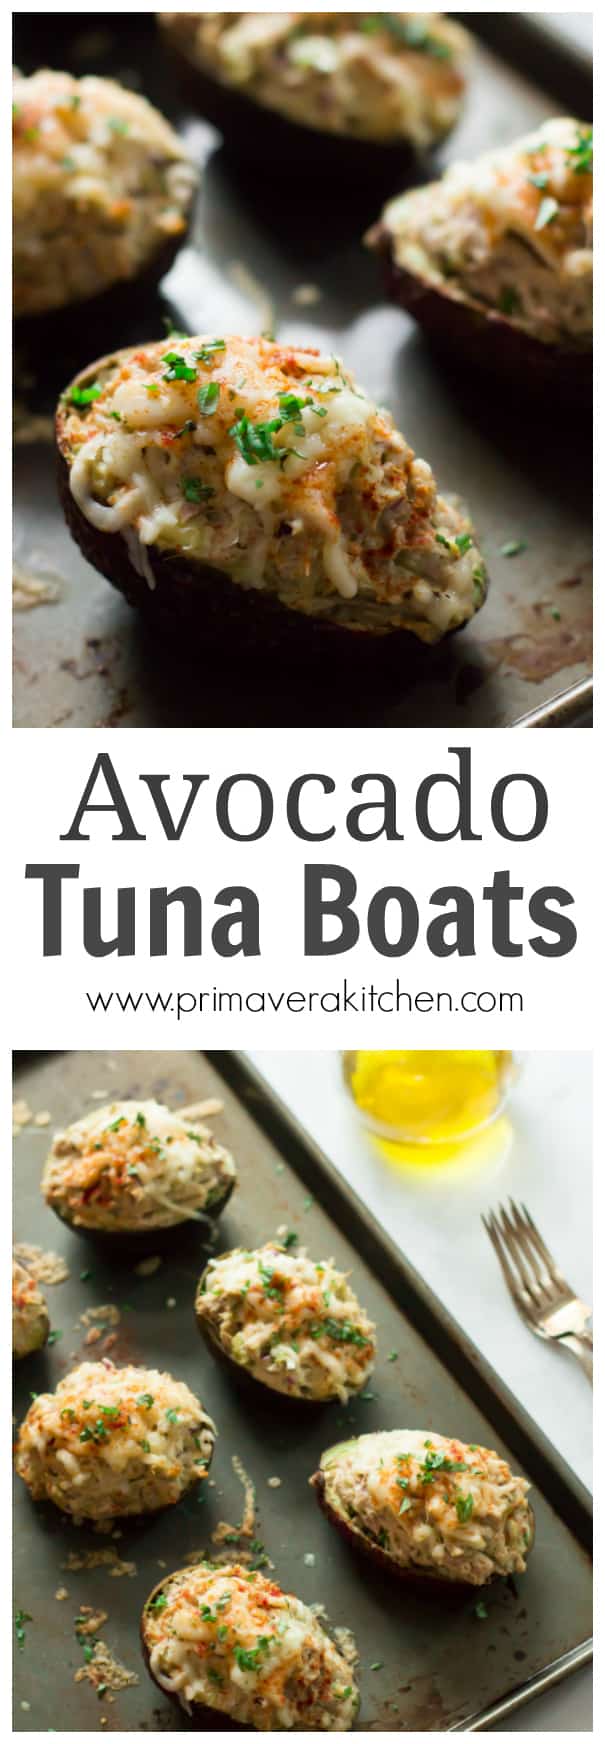 Avacado Tuna Boats - This Avocado Tuna Boats recipe makes a healthy, quick, easy and delicious snack, lunch or light dinner. These boats are also gluten-free, dairy-free, paleo friendly and low-carb. 